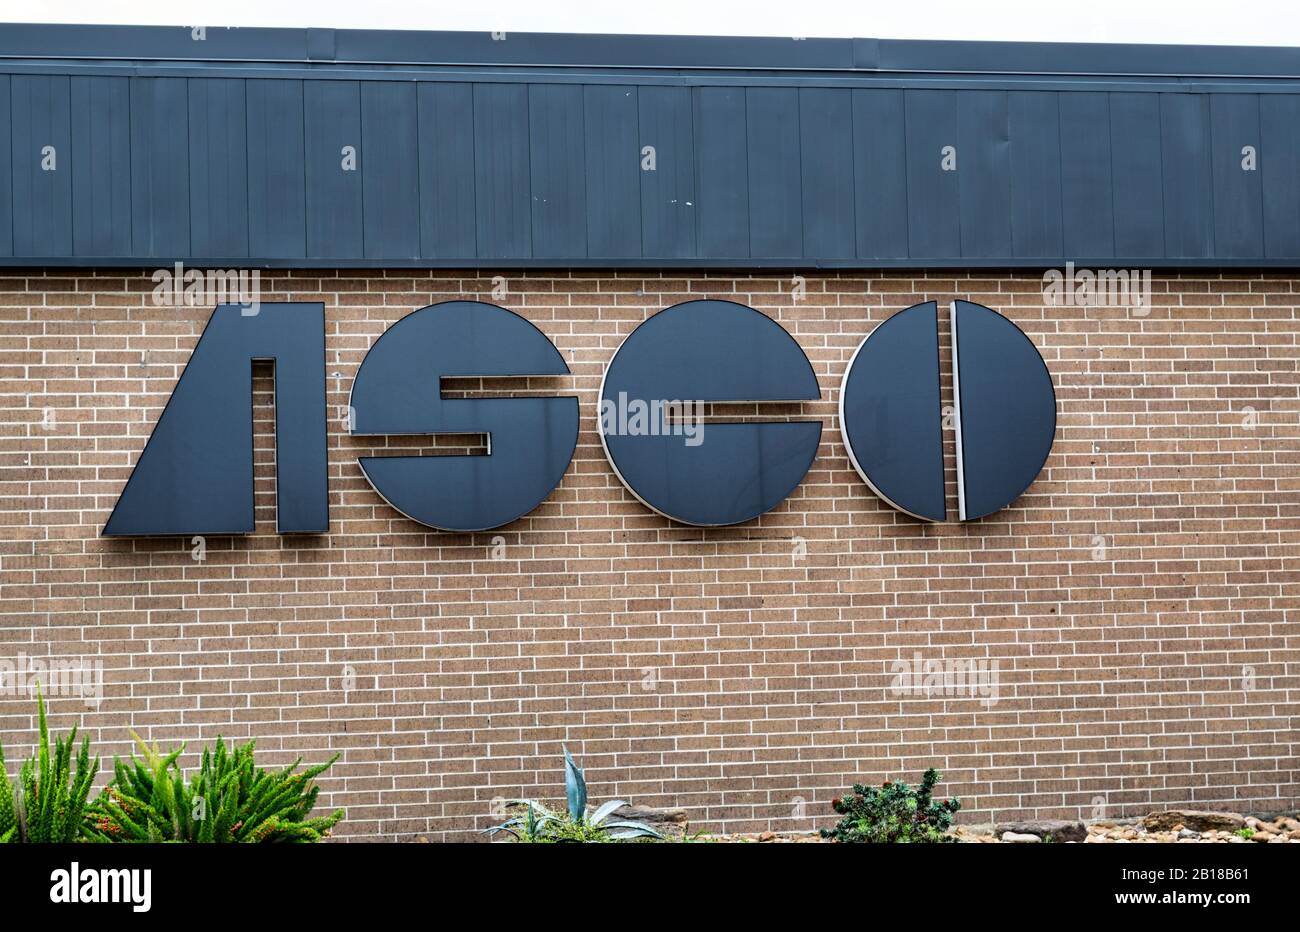 ASCO Equipment Company sign on building exterior in Houston, TX. Heavy machinery equipment and parts sales and rental business. Stock Photo